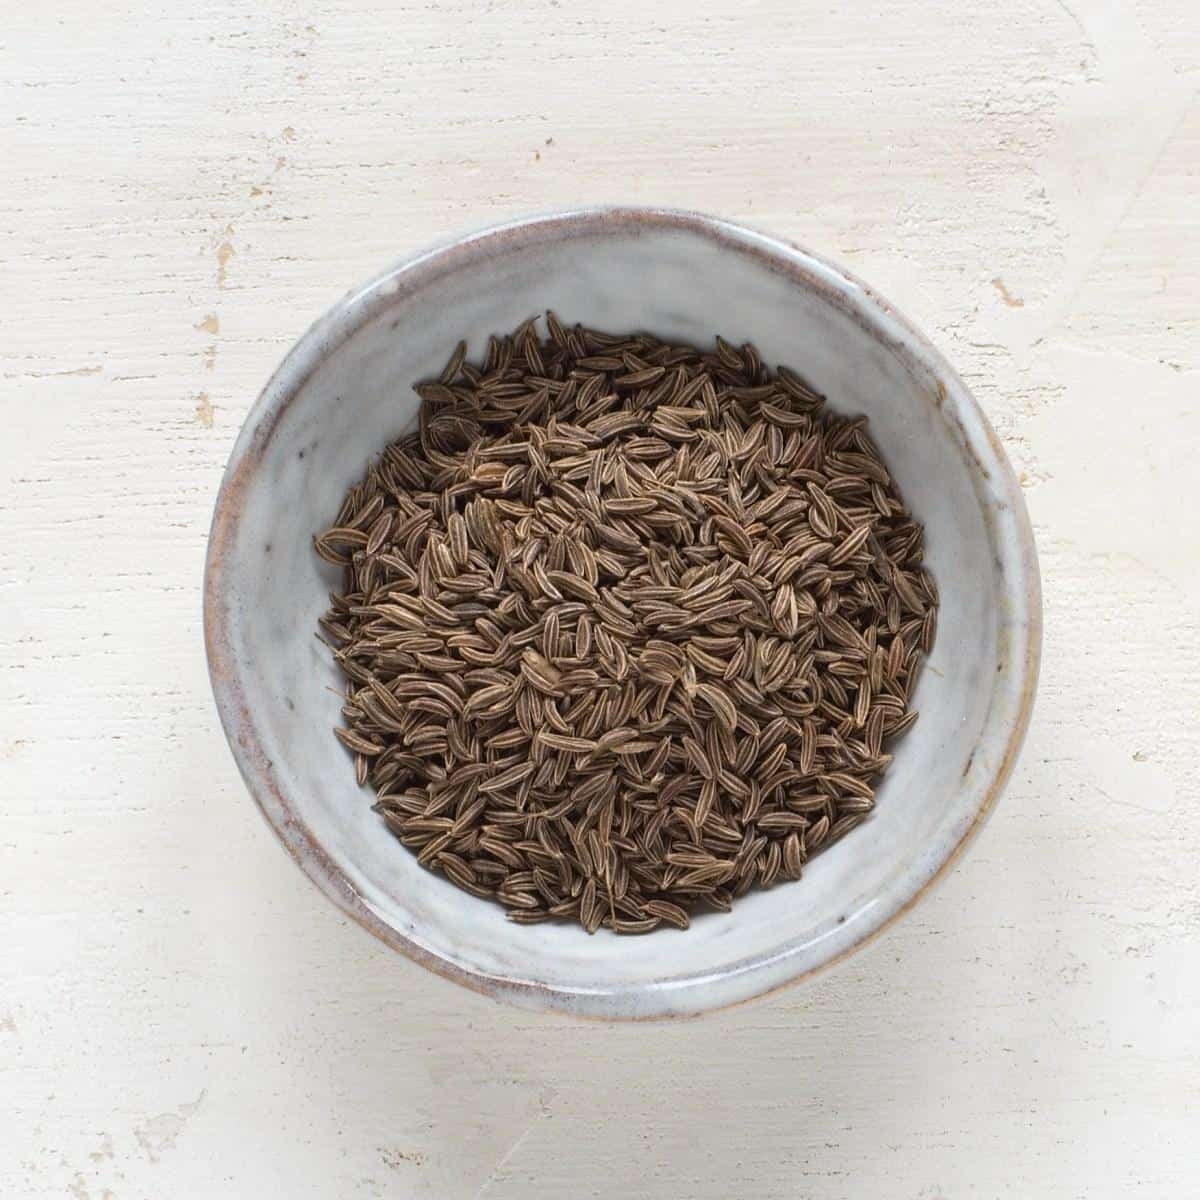 Caraway seeds in a small grey bowl.